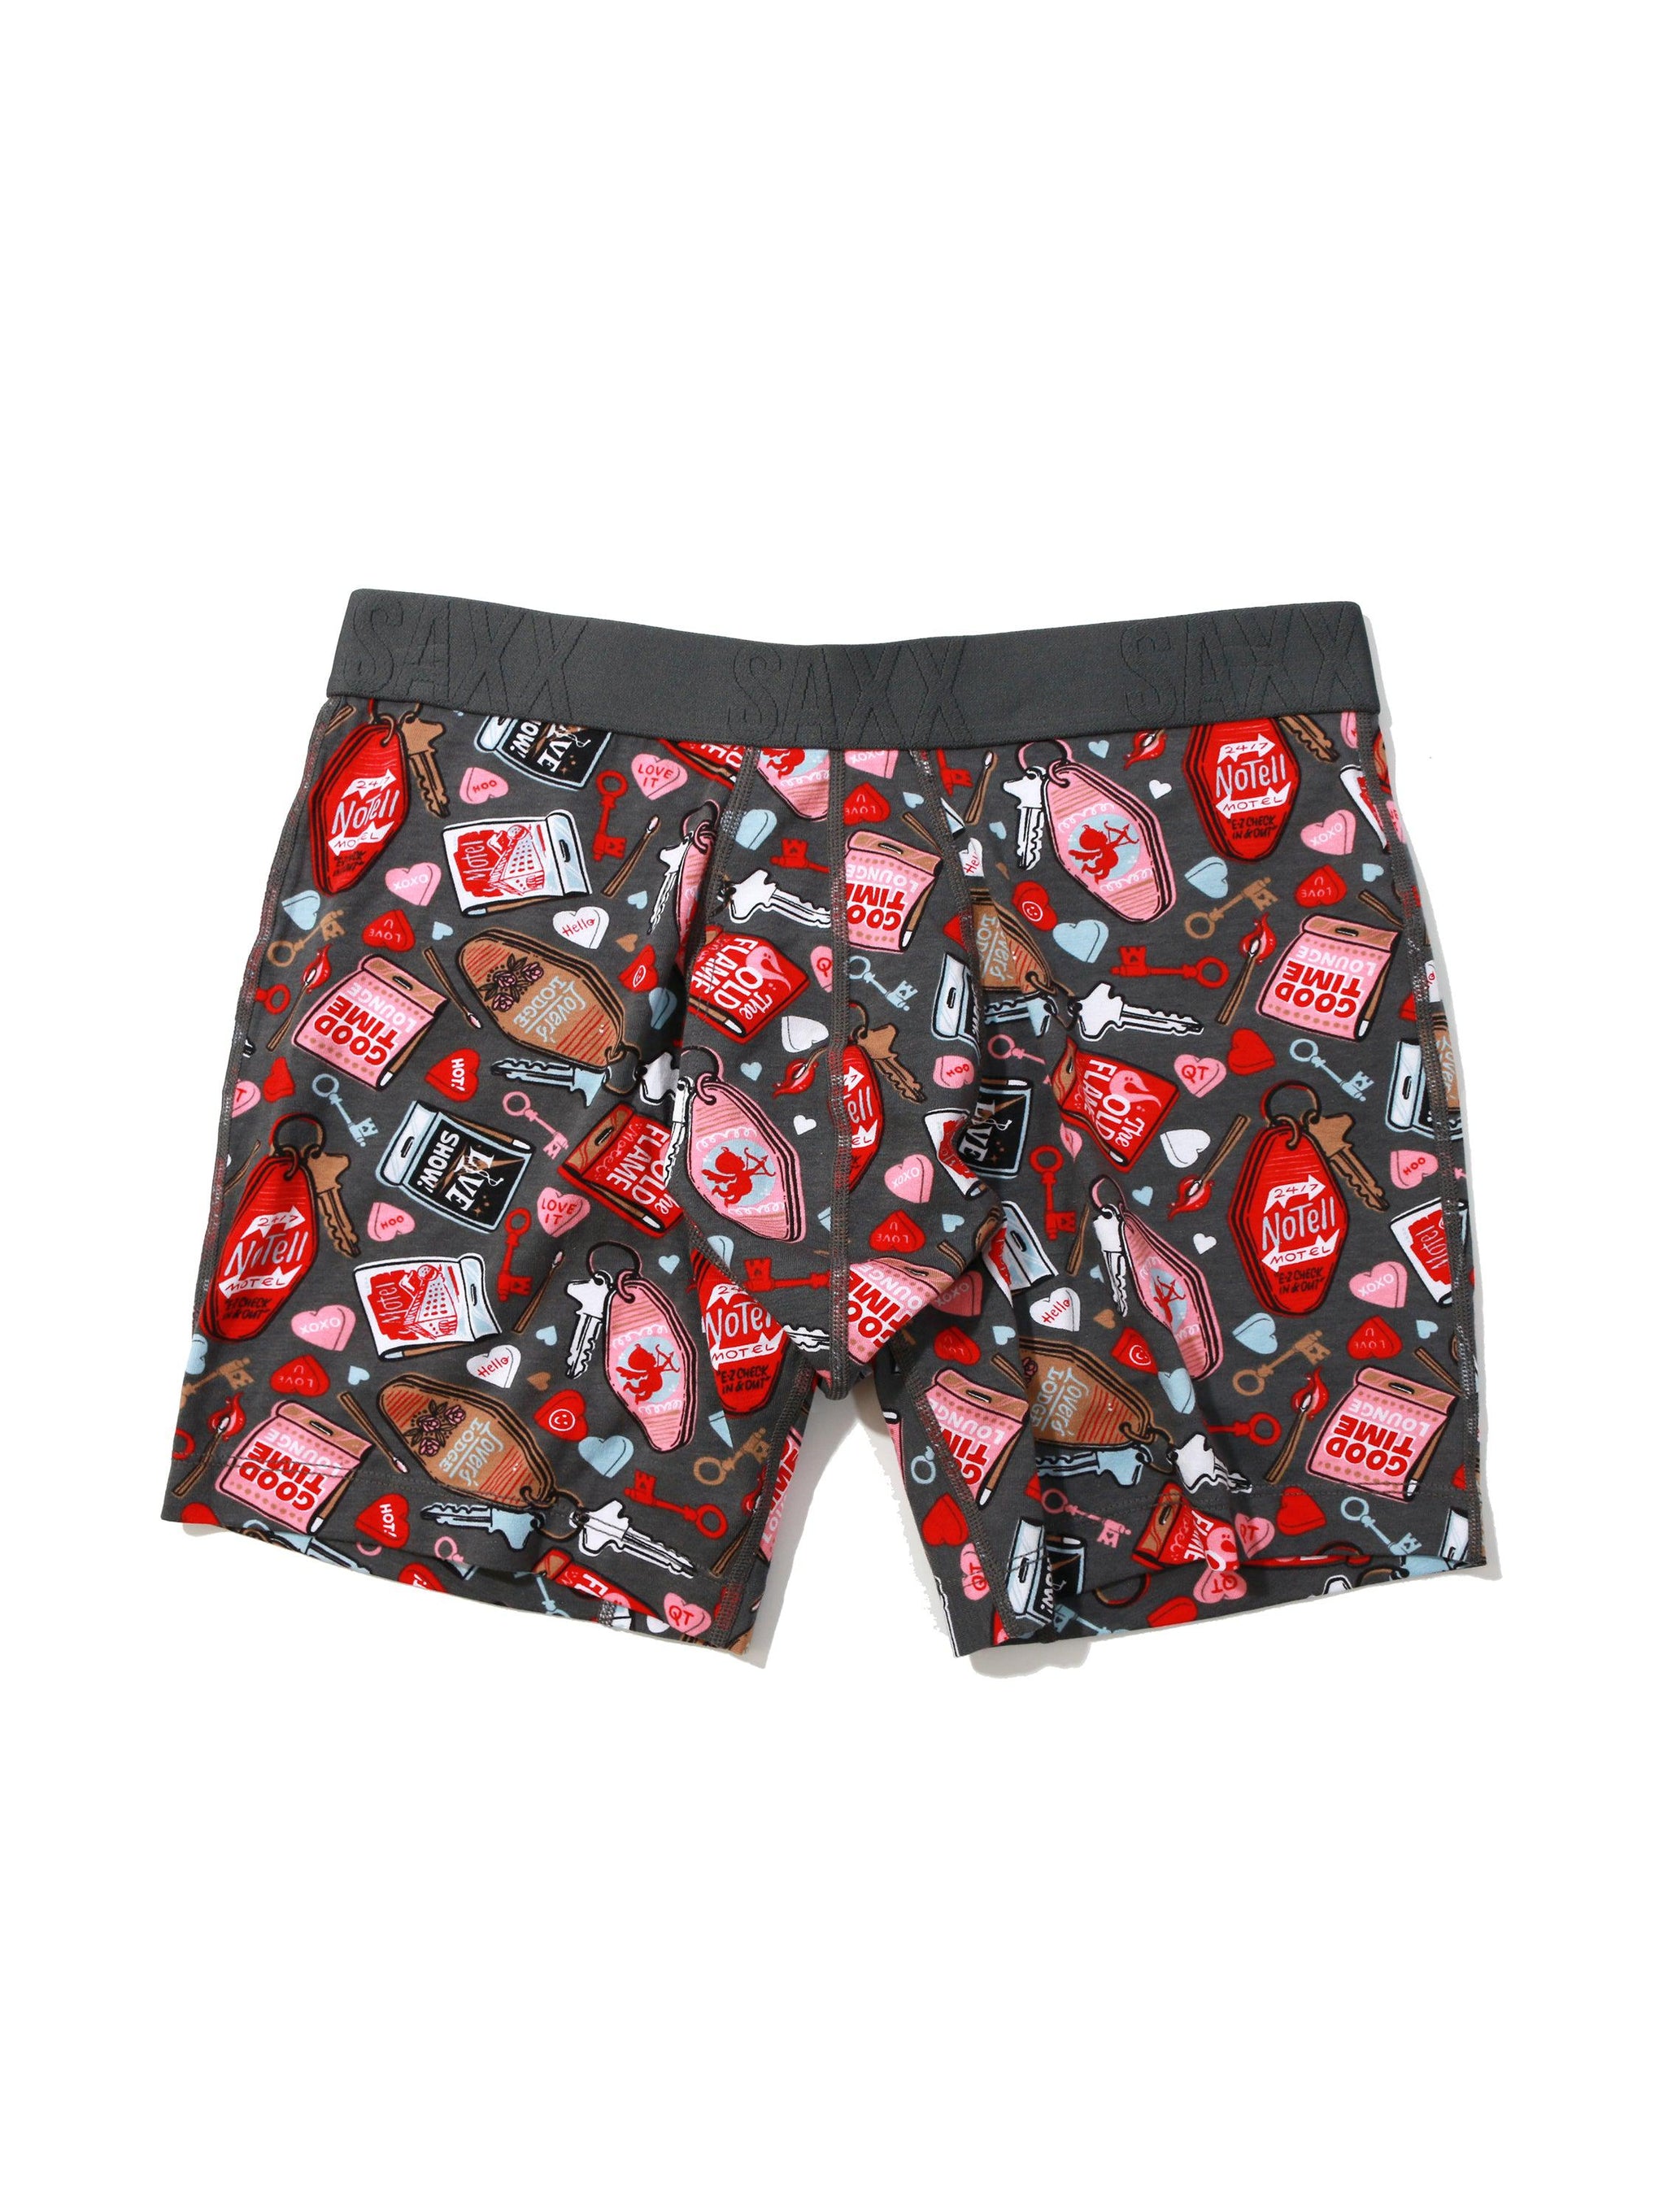 Signature Lace Original Rise Printed Thong and SAXX Drop Temp™ Cooling Cotton Boxer Brief